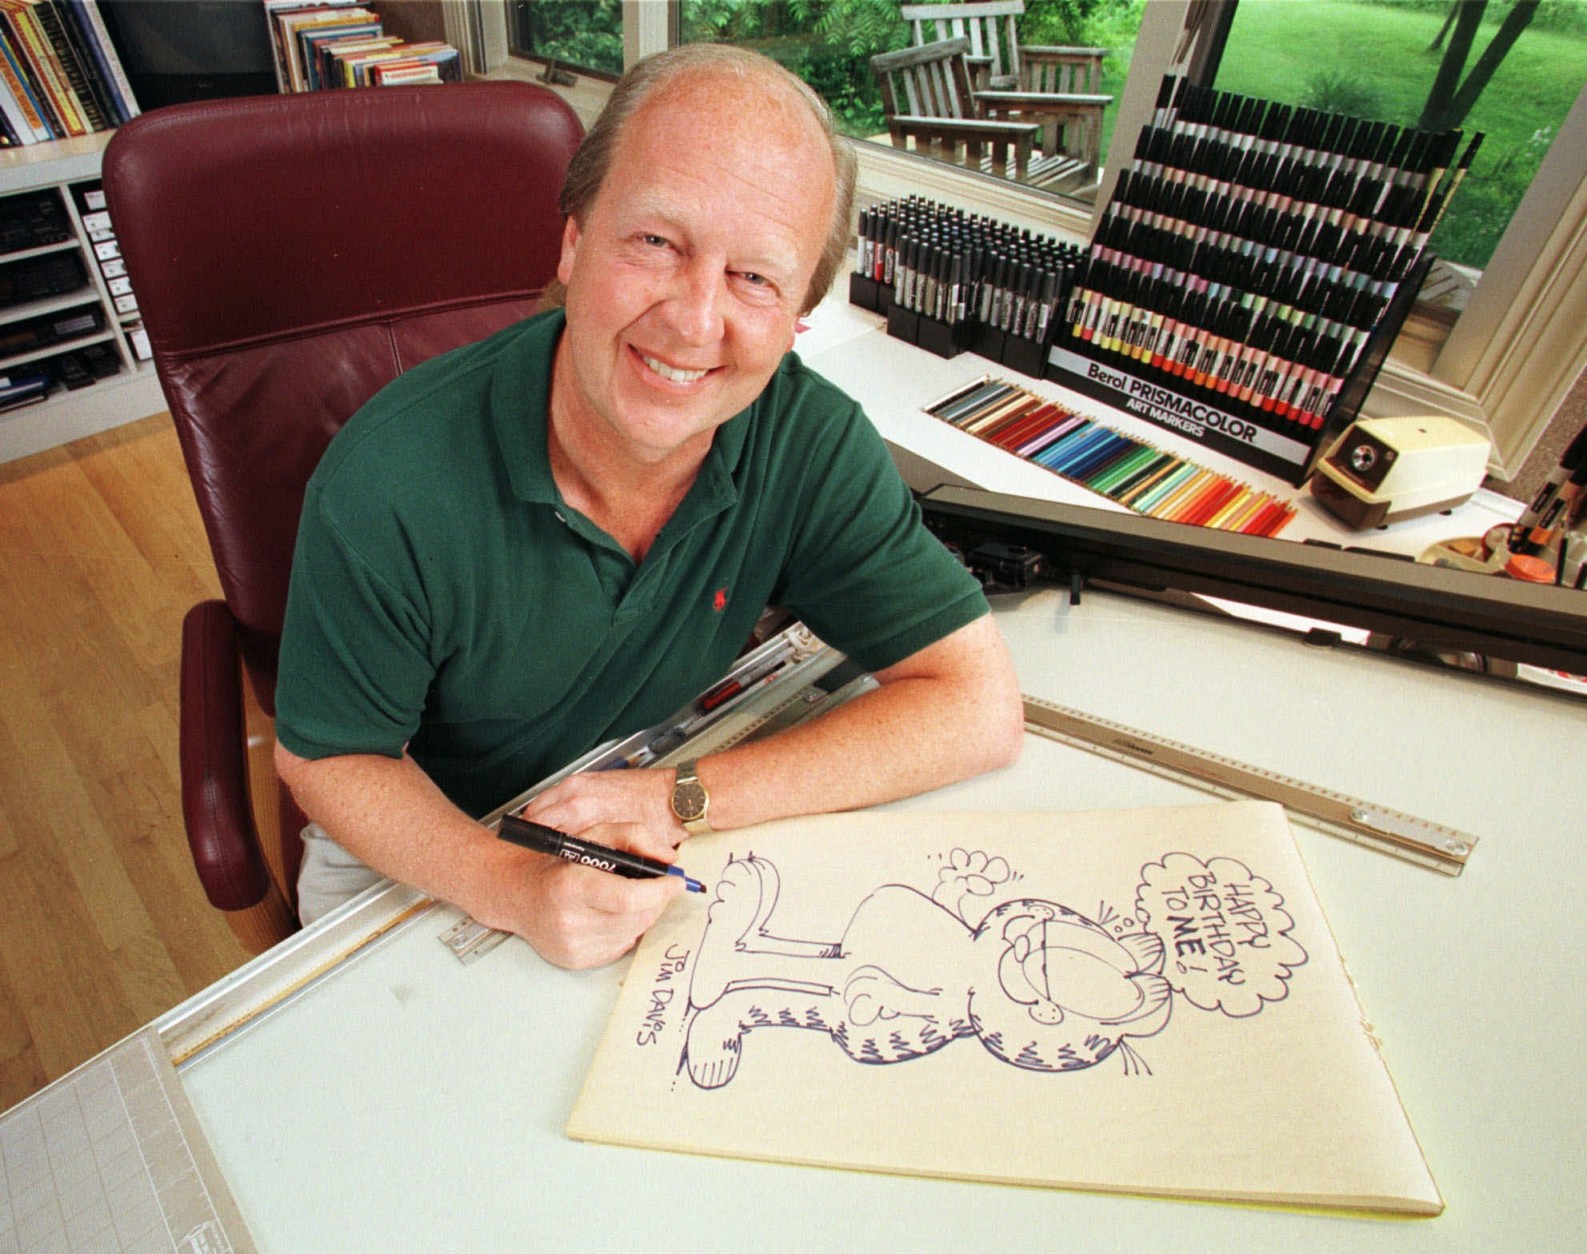 FILE - In this June 9, 1998 file photo, Garfield creator Jim Davis pauses after drawing the cartoon character in his Muncie, Ind., office. Davis apologized Thursday, Nov. 11, 2010, for a Garfield strip that some veterans may have found offensive. (AP Photo/Michael Conroy, File)